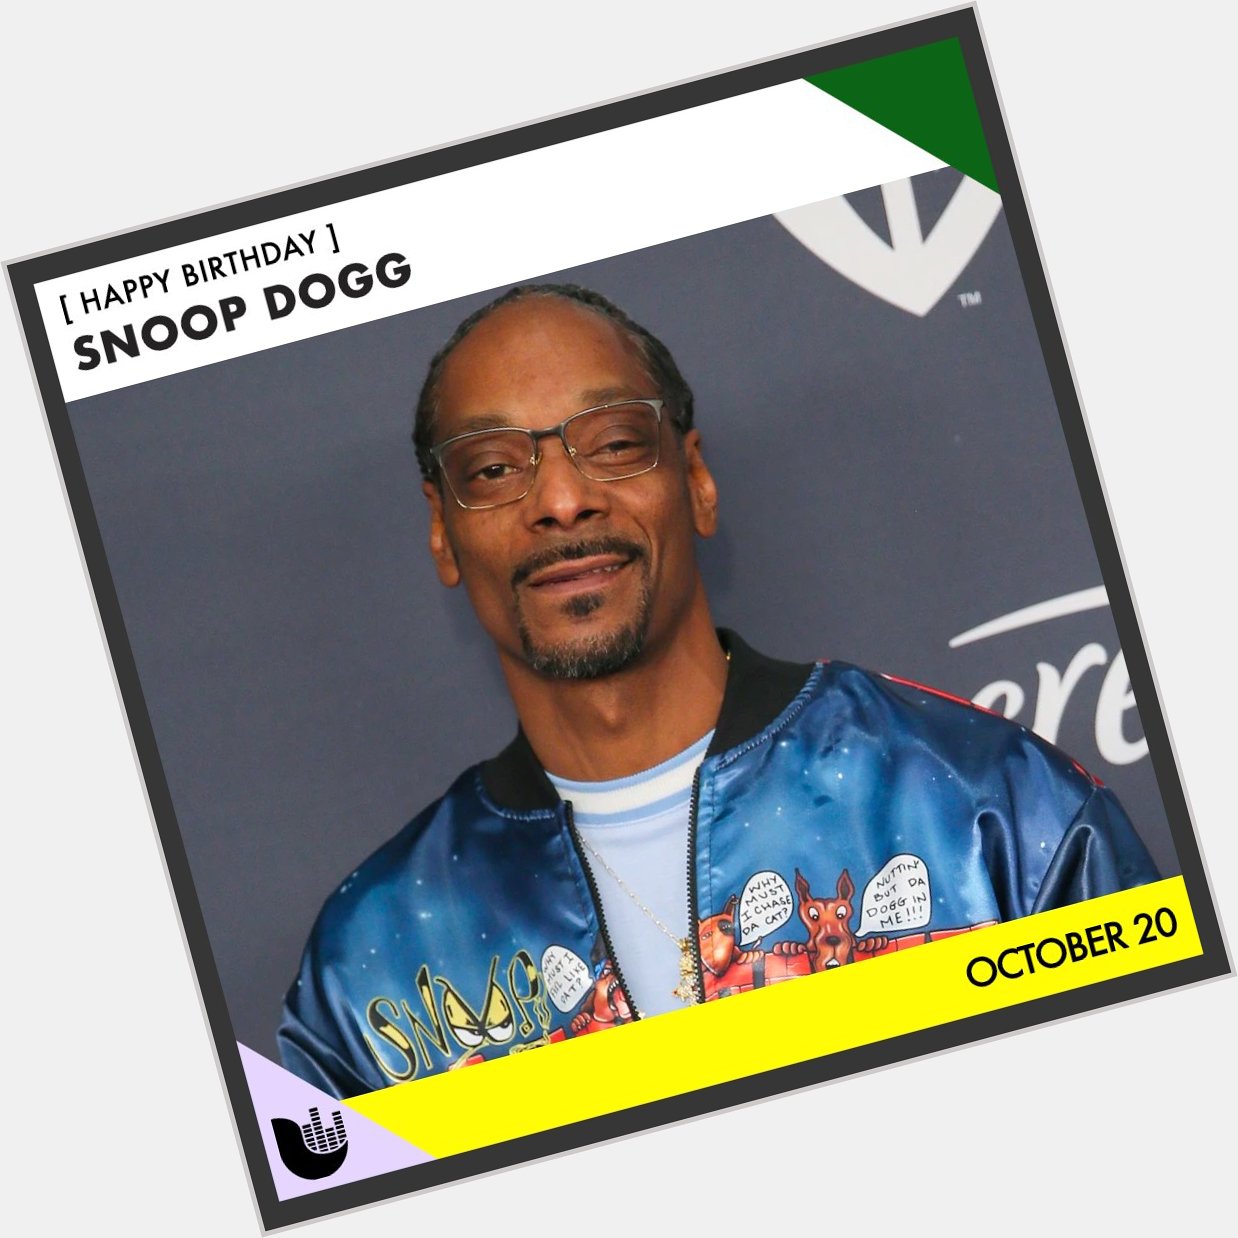 Join us in wishing Snoop Dogg a happy birthday! 